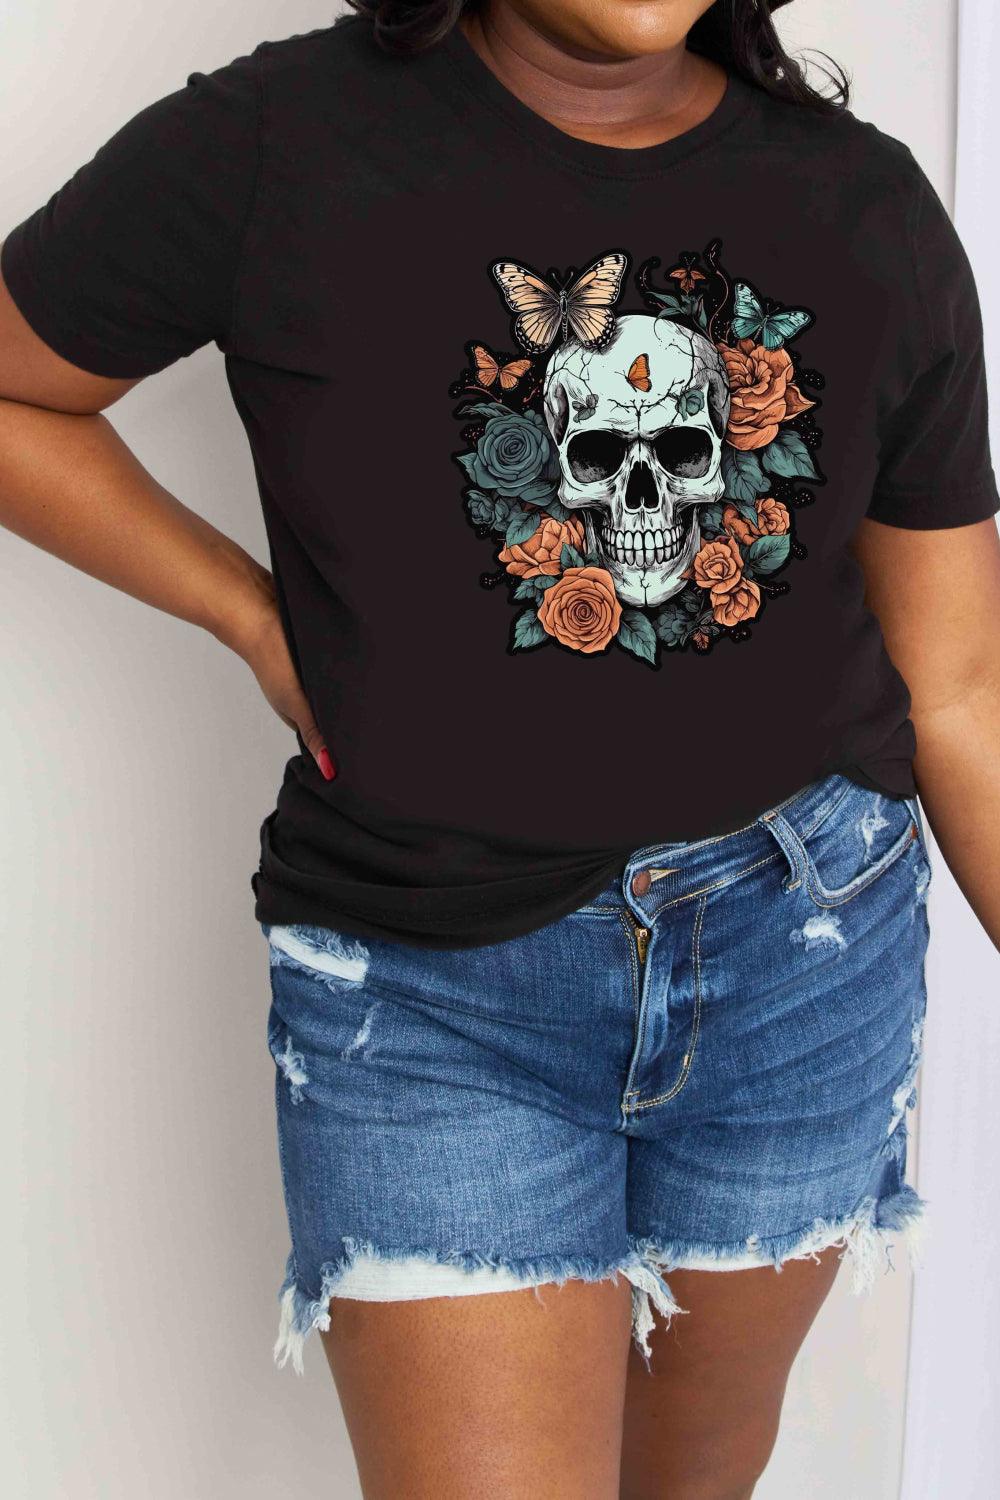 Simply Love Simply Love Full Size Skull Graphic Cotton T-Shirt - Lab Fashion, Home & Health